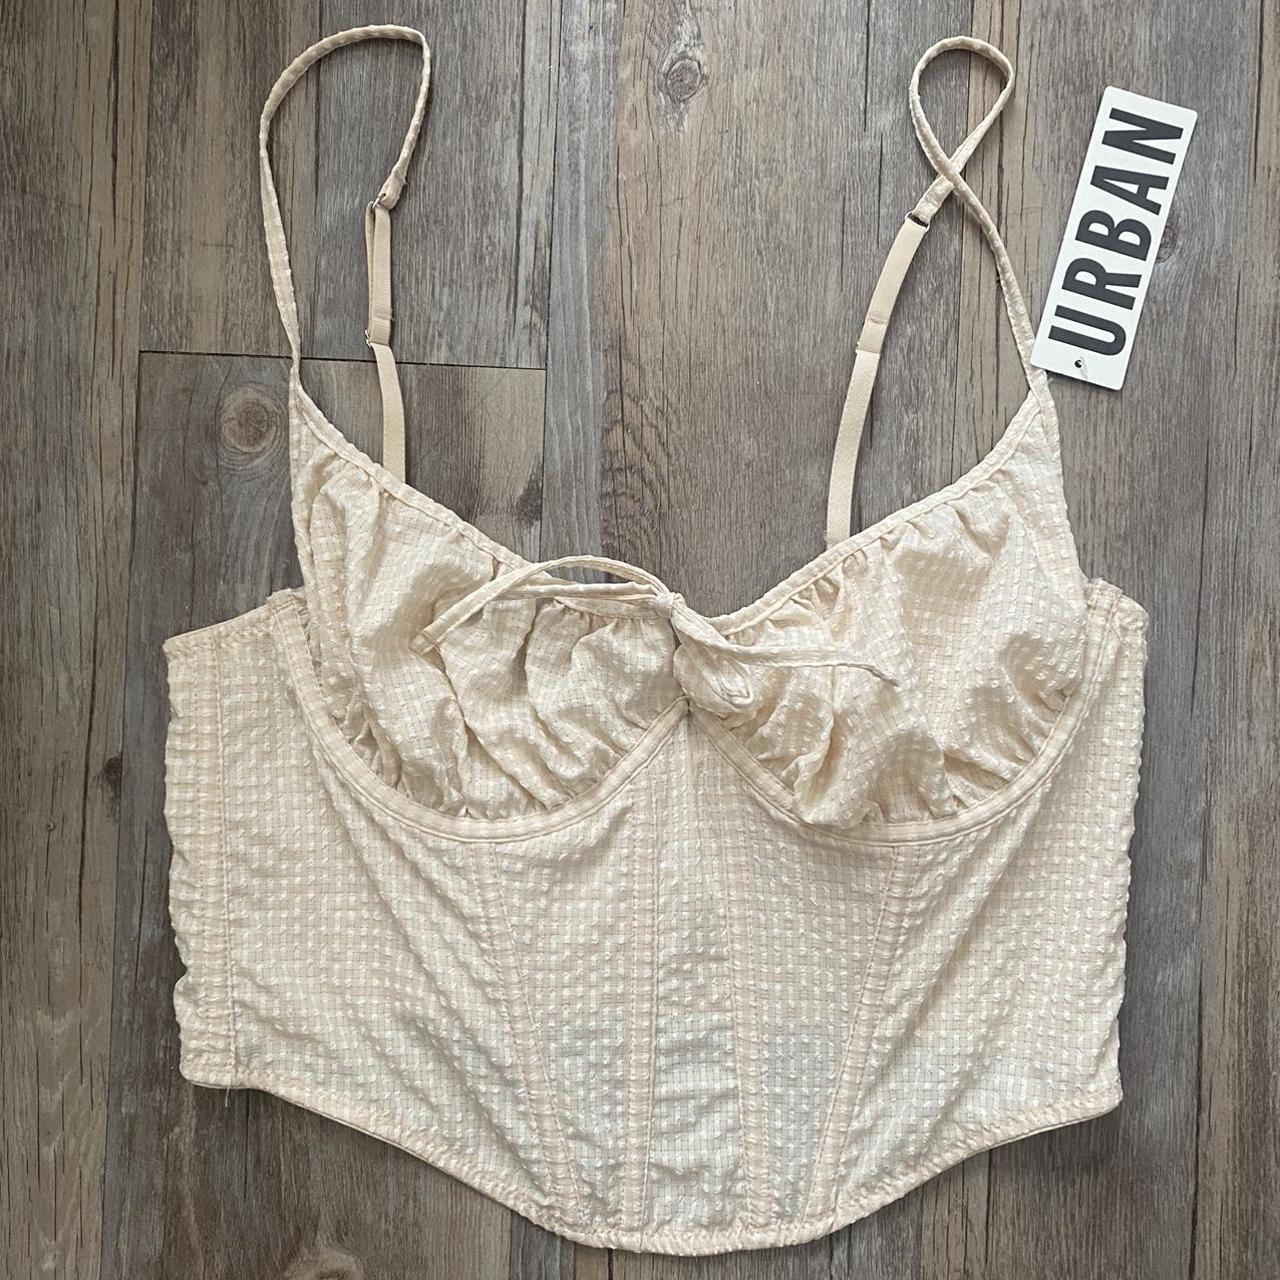 Super cute Urban outfitters ivory / cream gingham - Depop